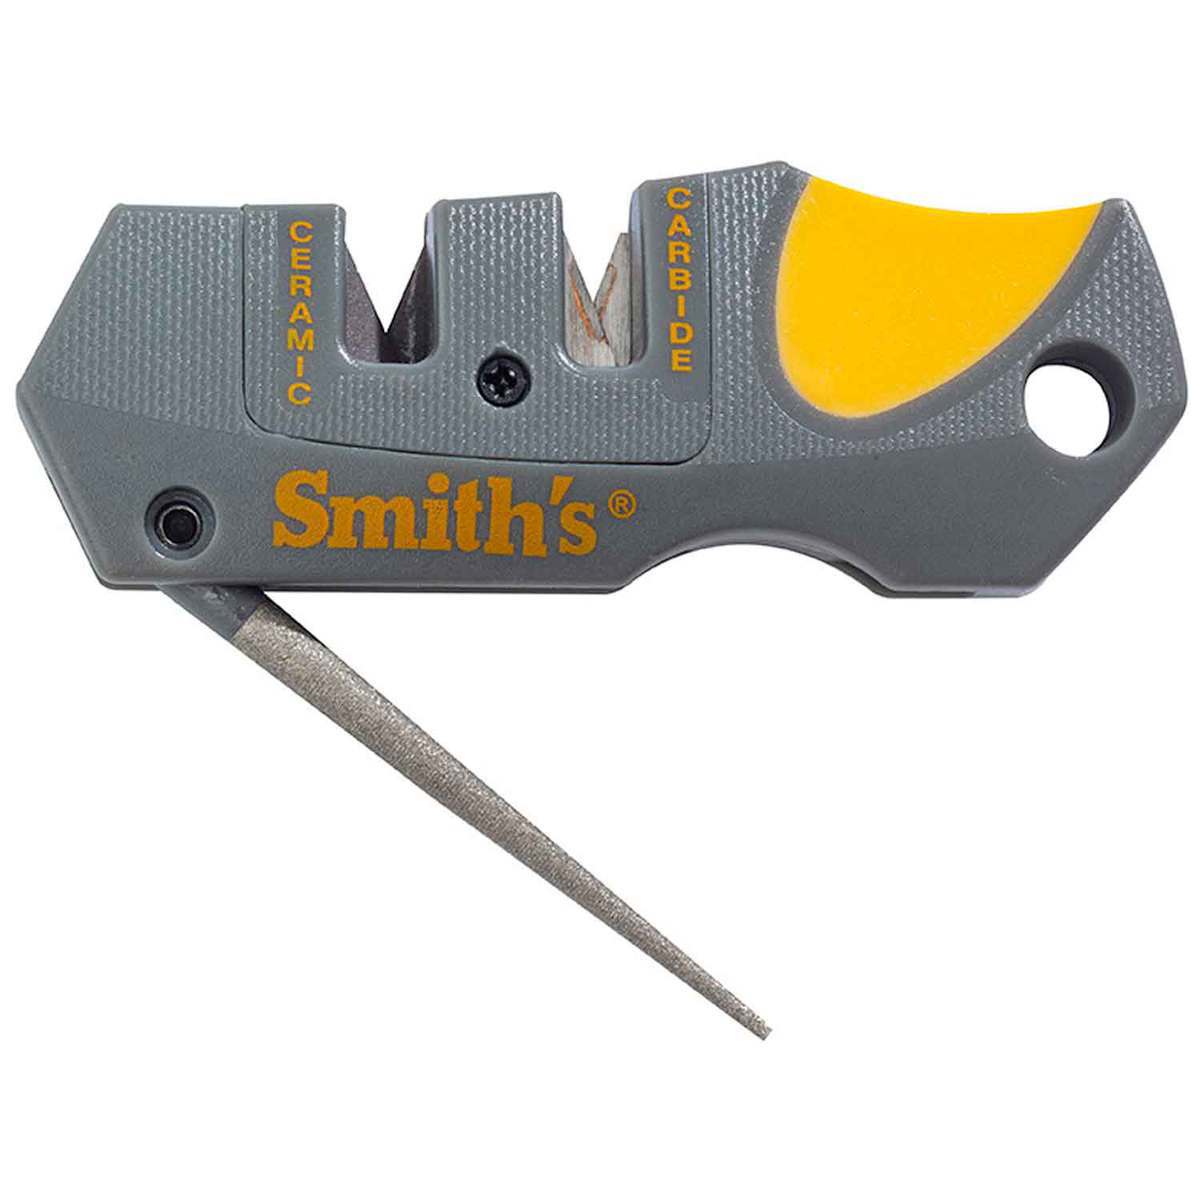 Smith's Consumer Products Store. SHOP - SHARPENERS